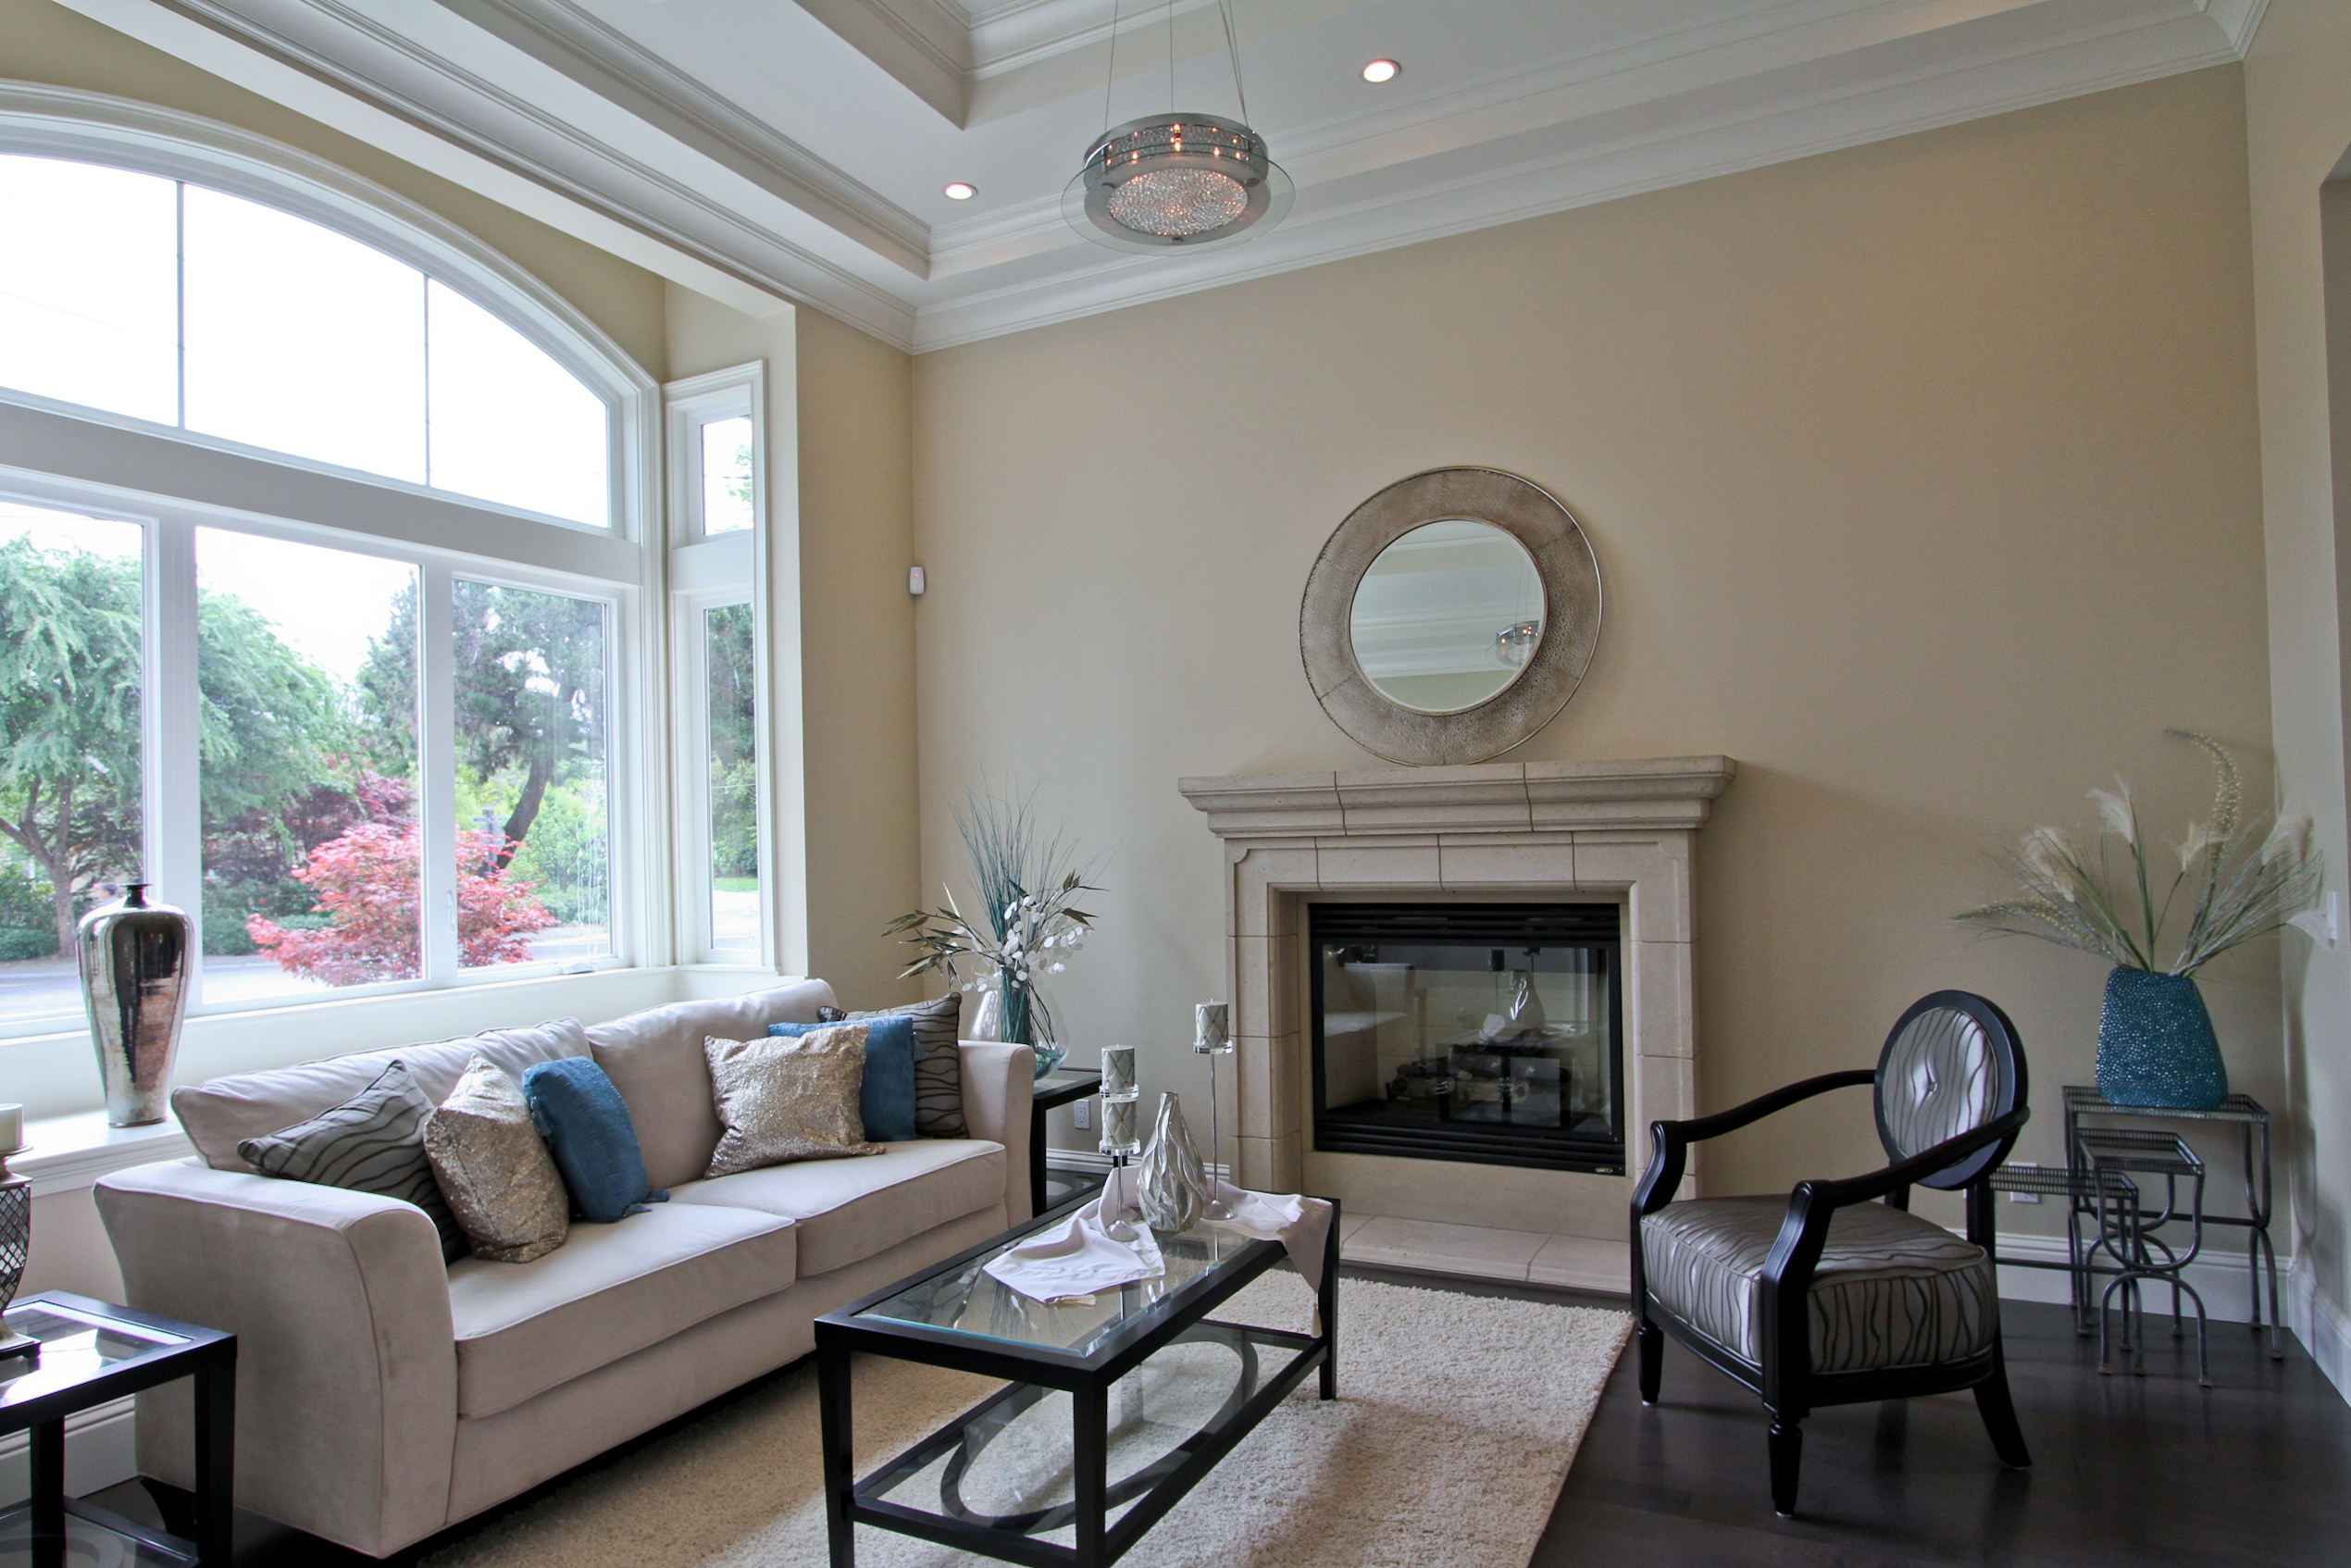 Interiors of custom home built in sunnyvale, palo alto, los altos, cupertino, mountain view, and redwood city services areas